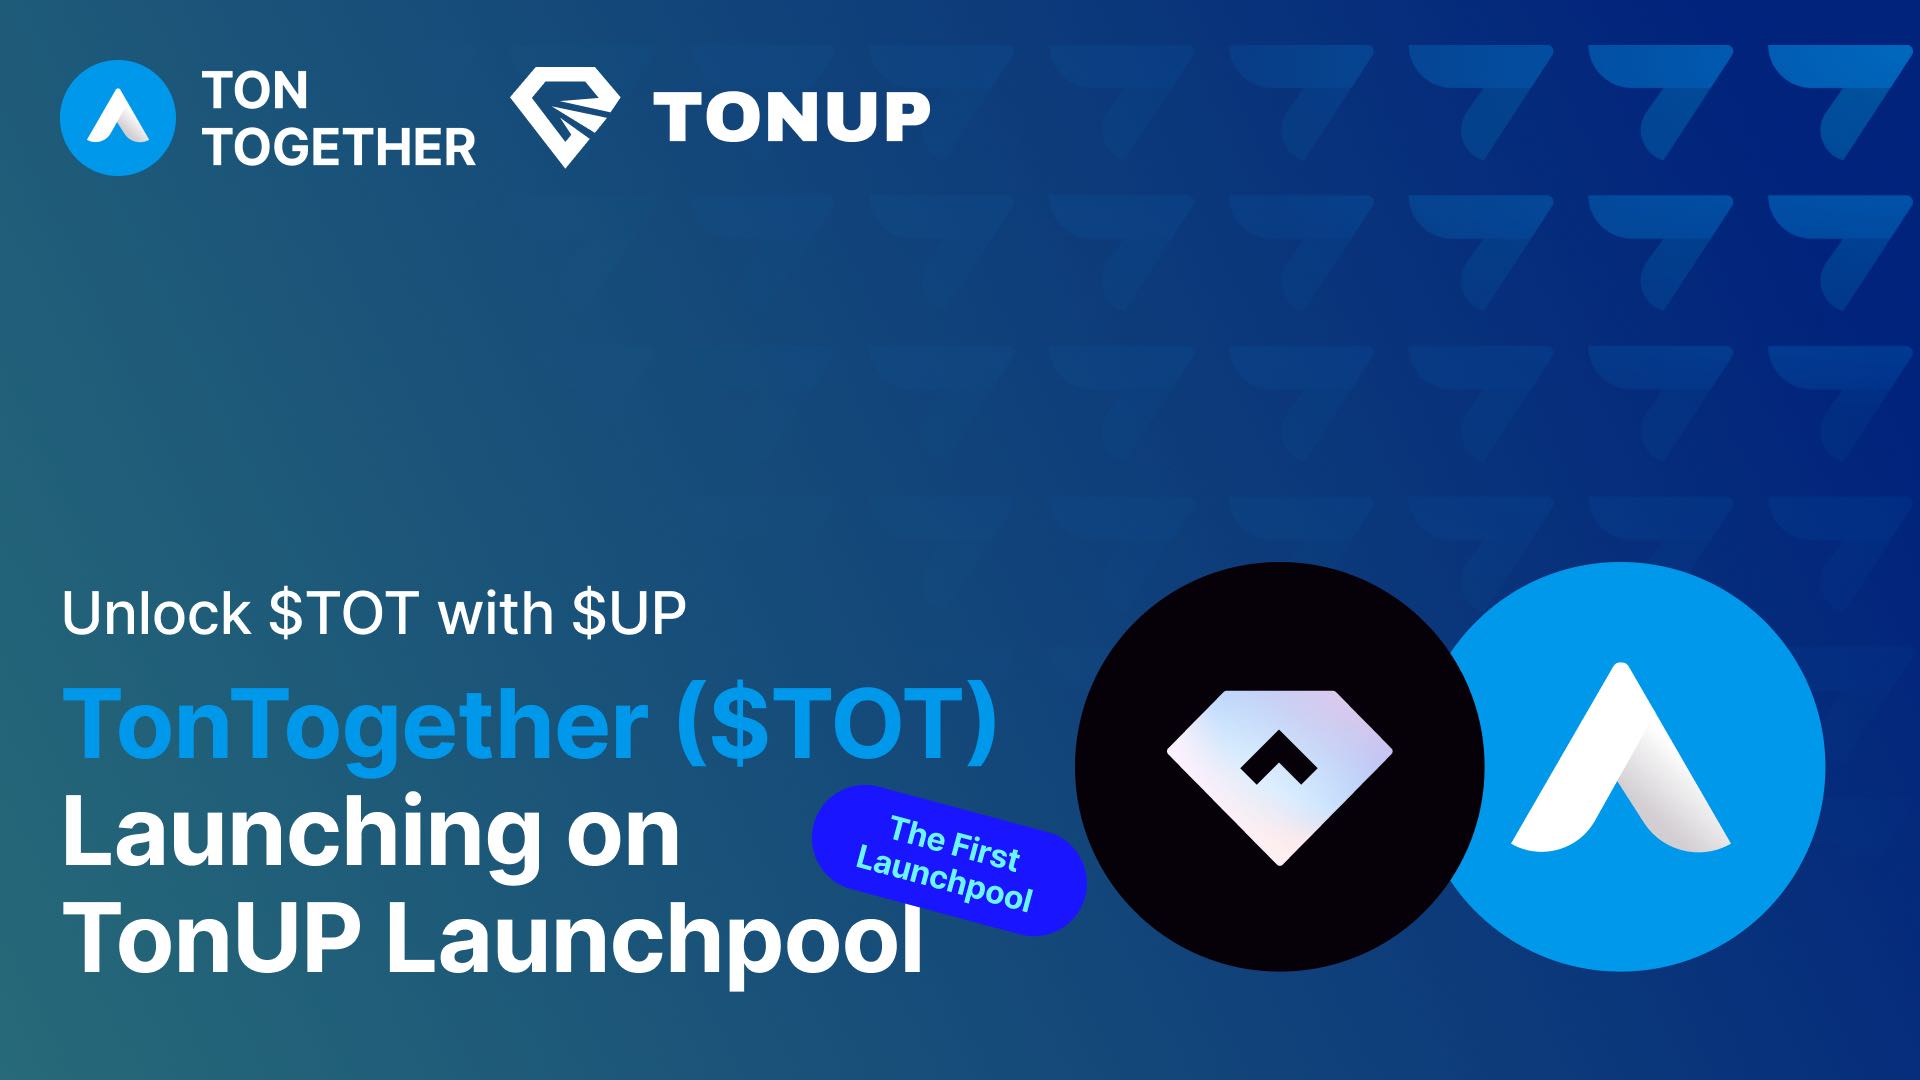 TonTogether -$TOT- Launching on TonUP Launchpool